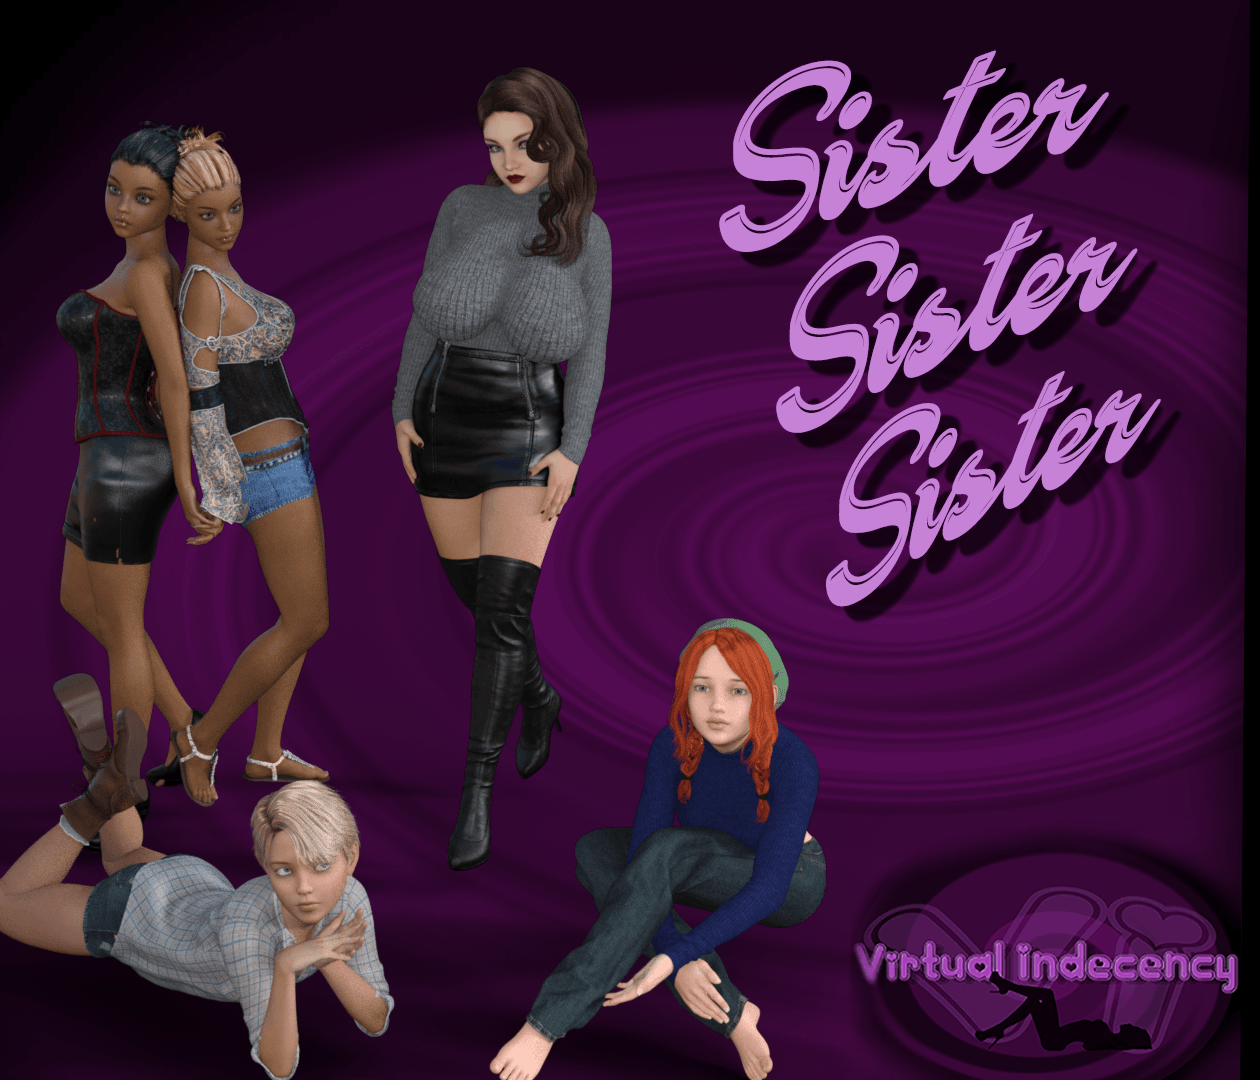 Sister, Sister, Sister – Chapter 3 SE - Free incest porn PC game 4